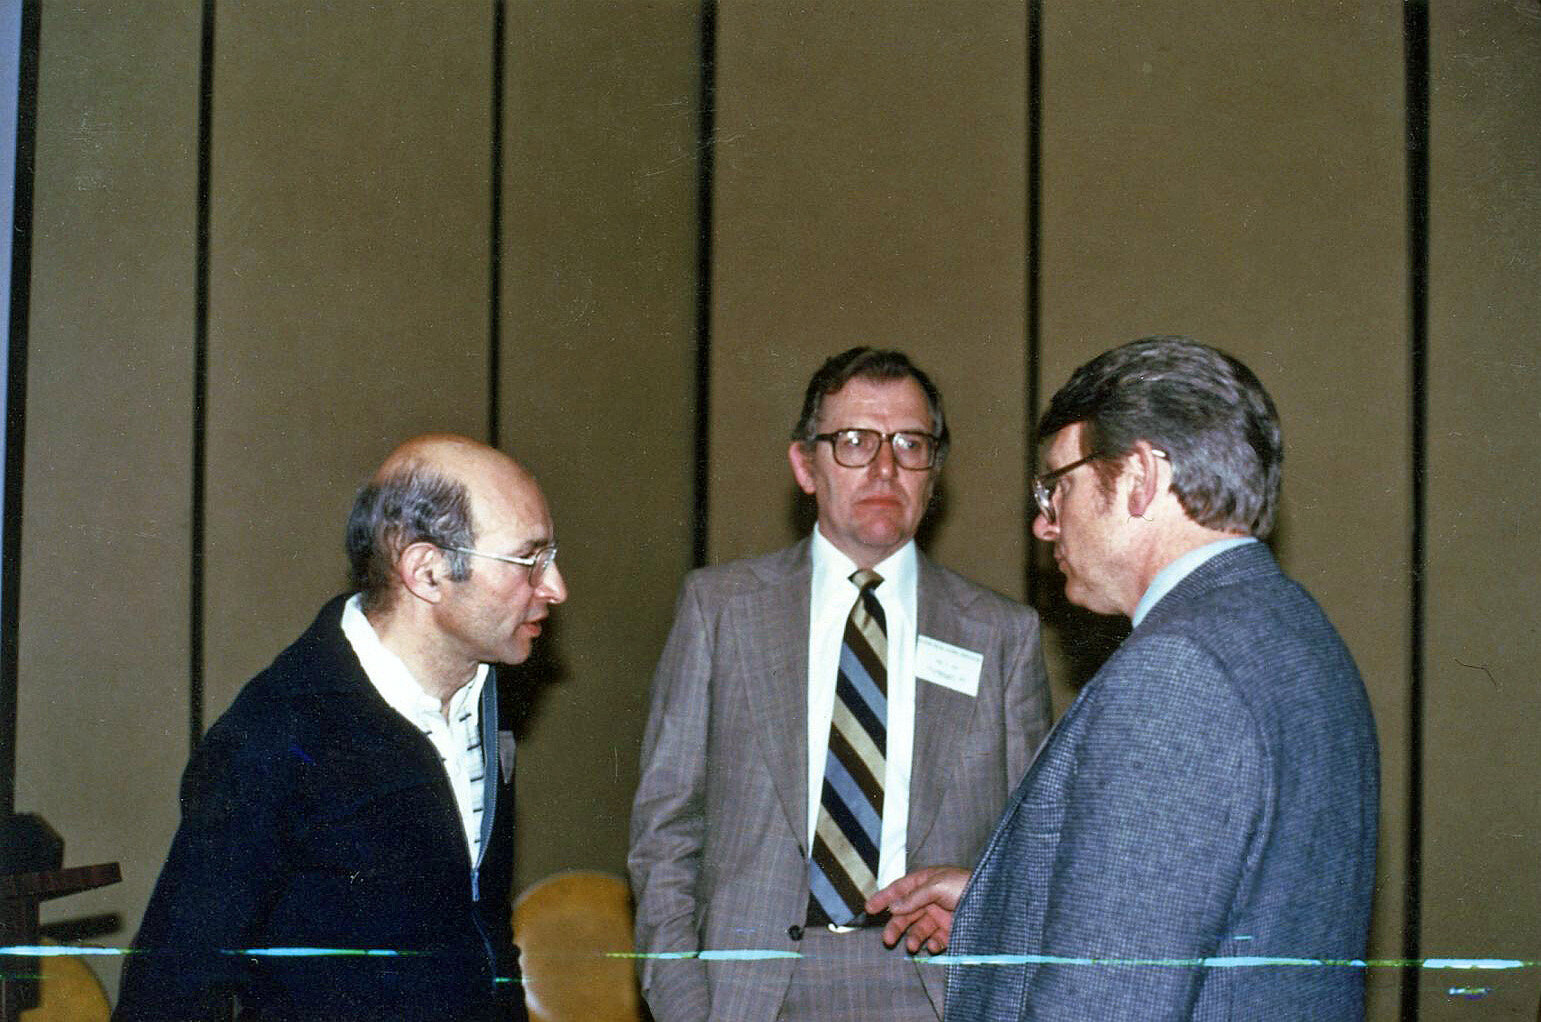 Lou Junker, Marc Tool, and Dale Bush (left to right)